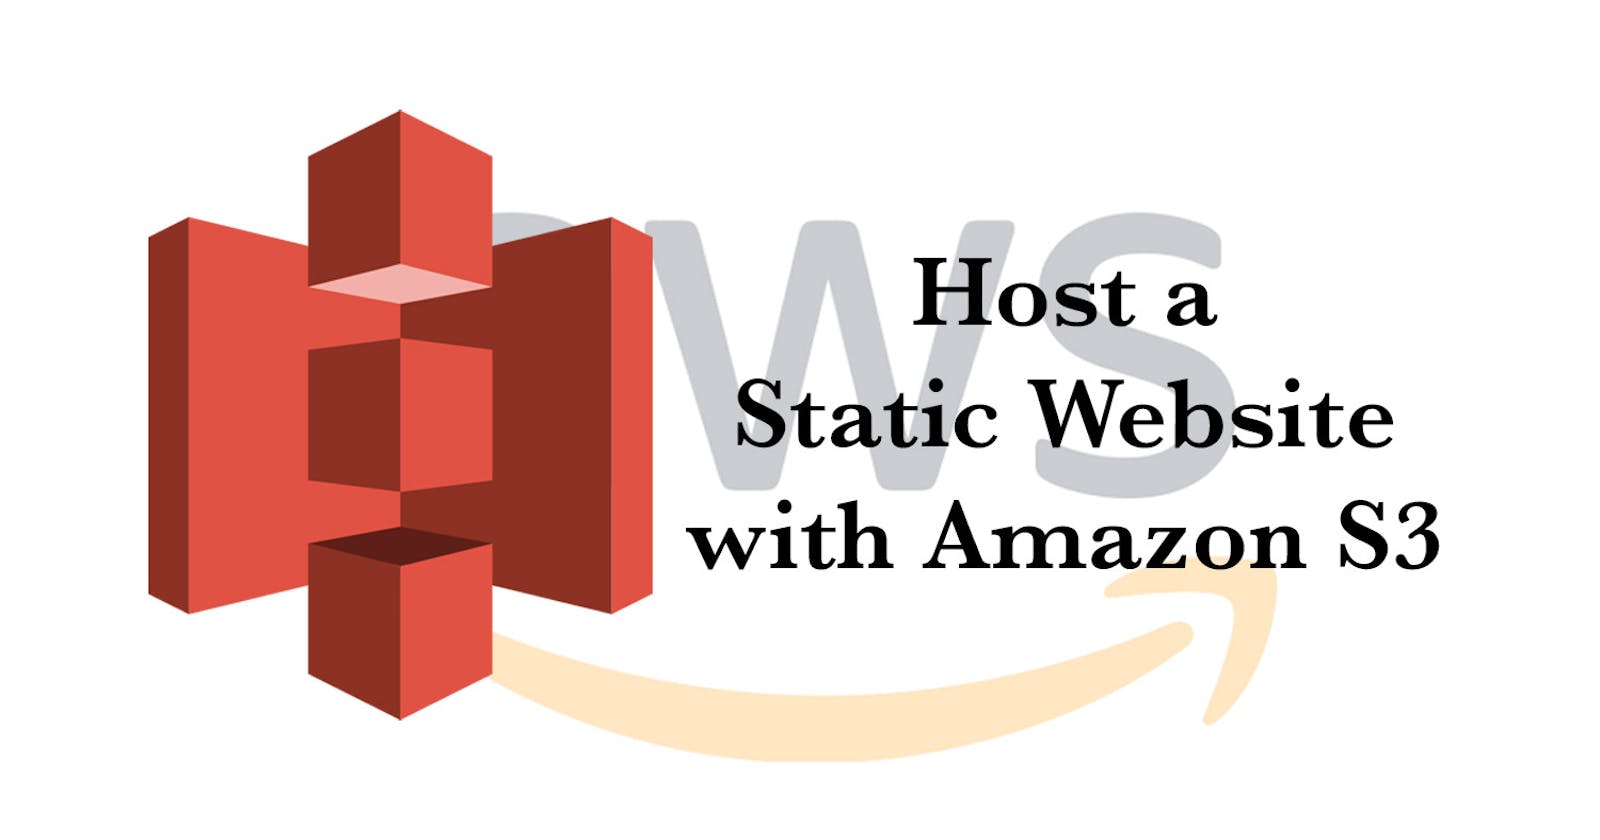 Hosting a Static Website Using Amazon S3